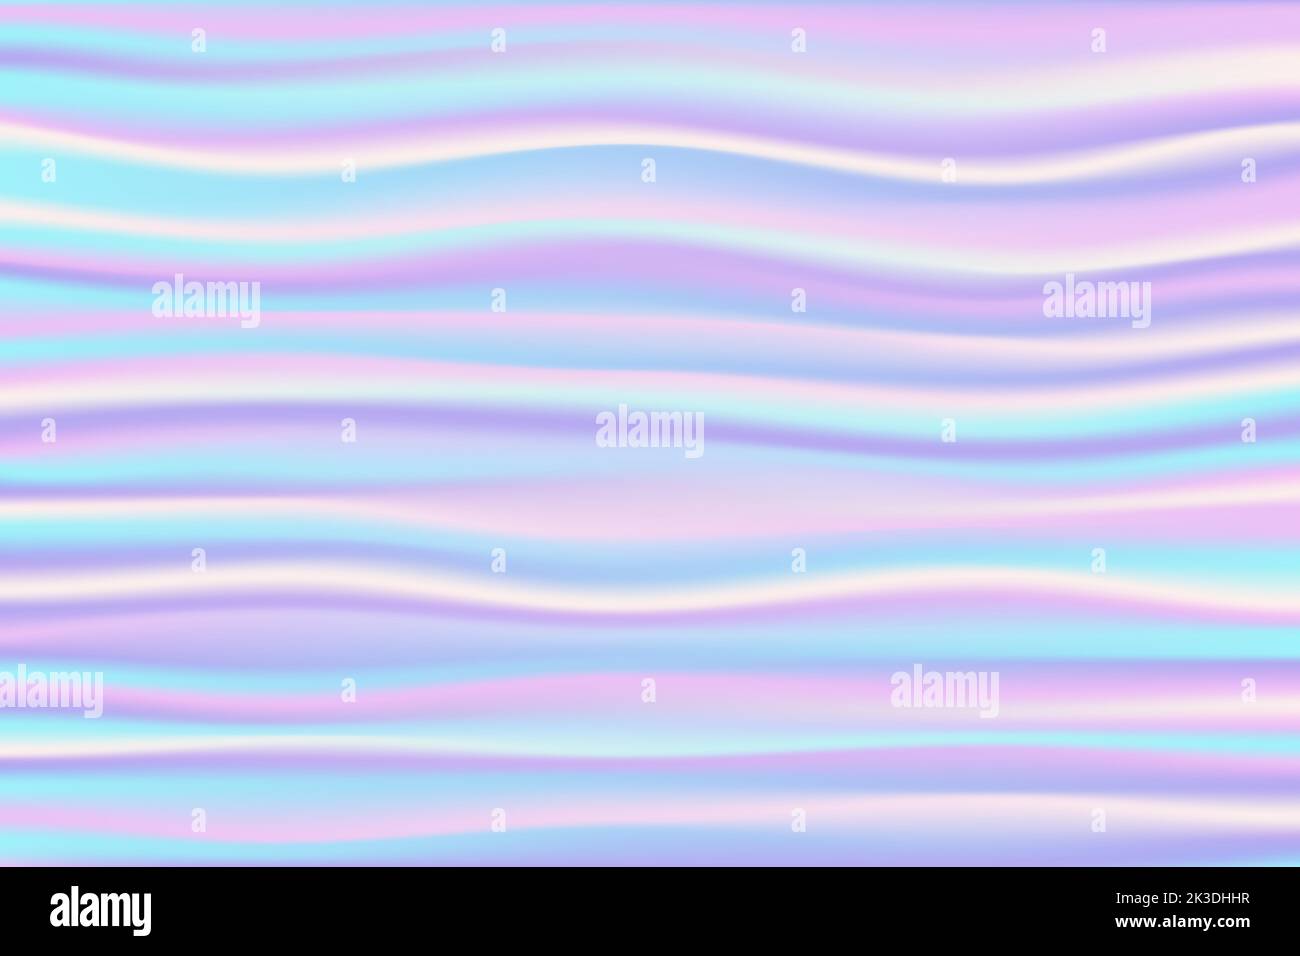 Holographic striped gradient background. Iridescent neon texture with abstract pattern. Rainbow unicorn wallpaper. Vector illustration. Stock Vector